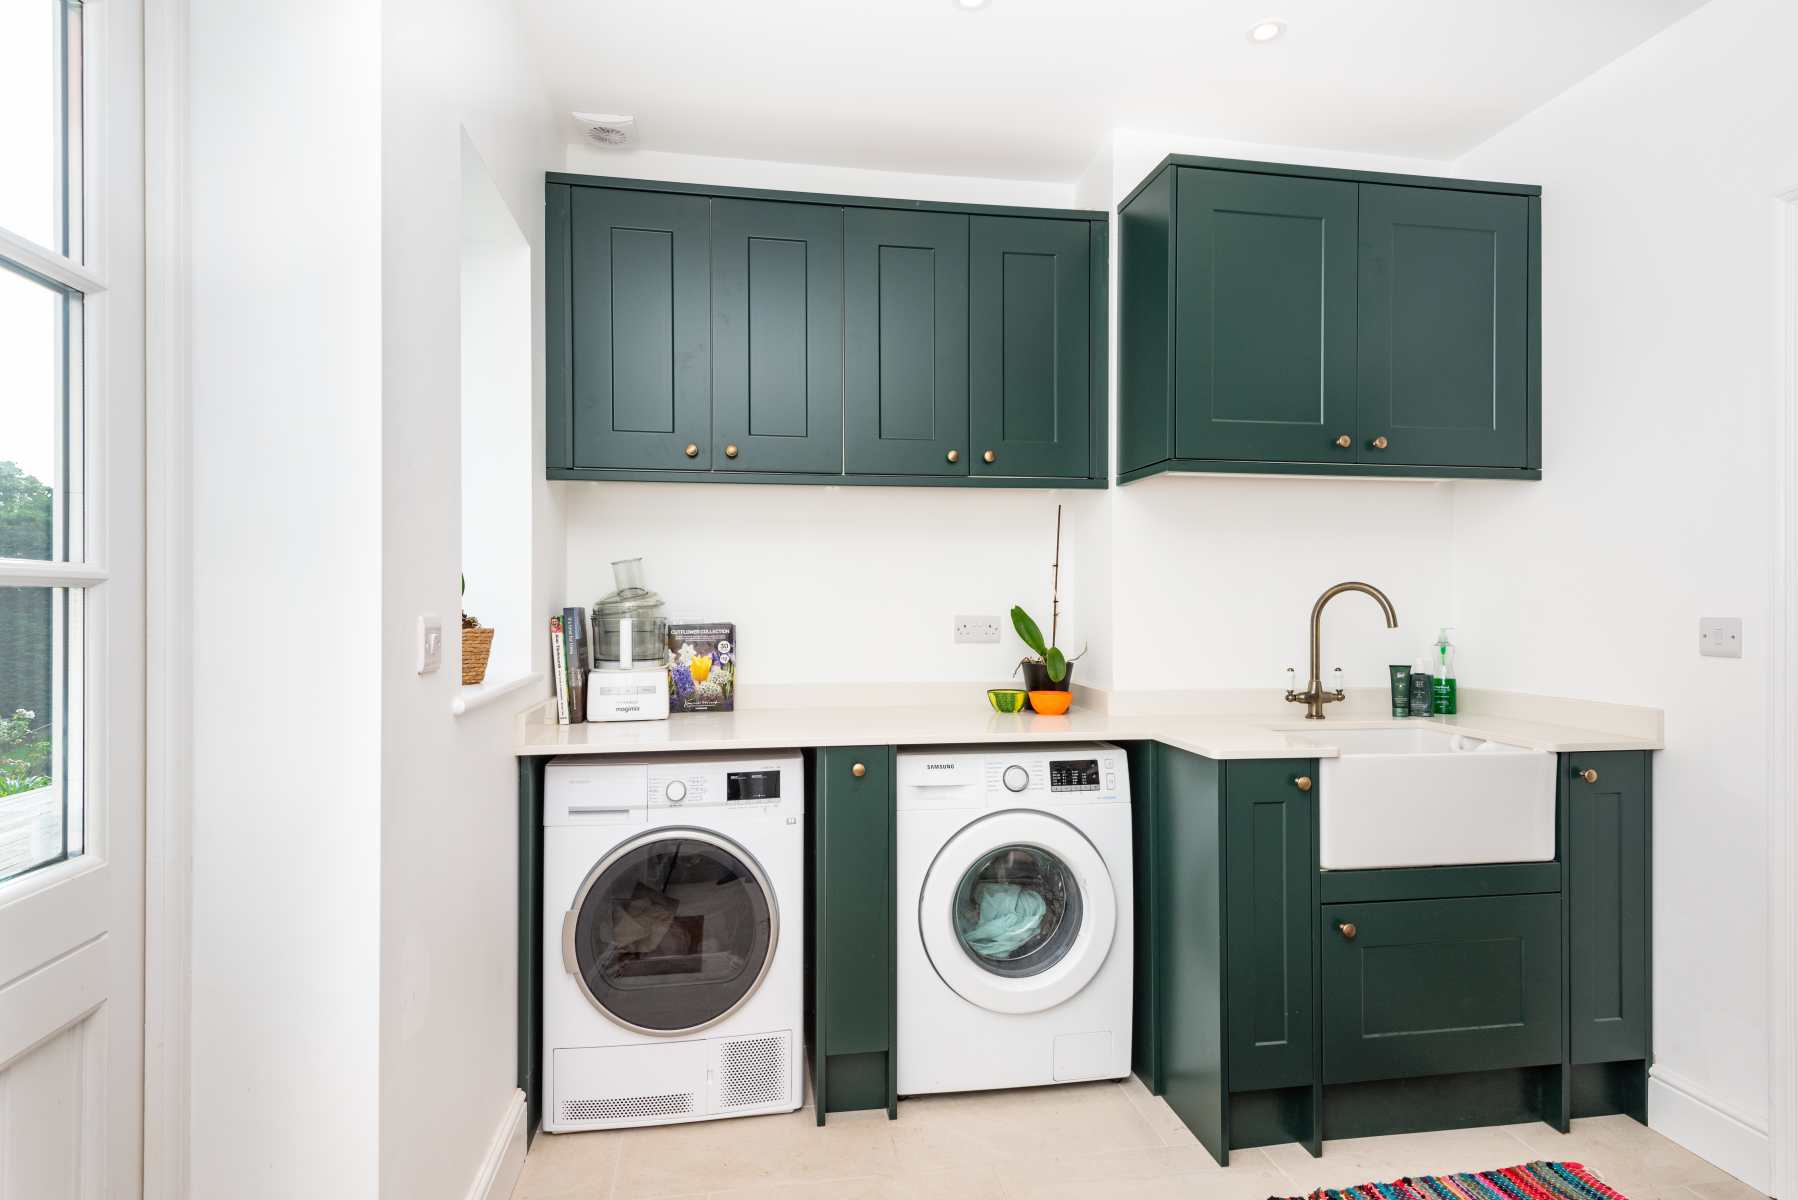 Interior view of a newly renovated utility room with modern appliances and efficient storage.